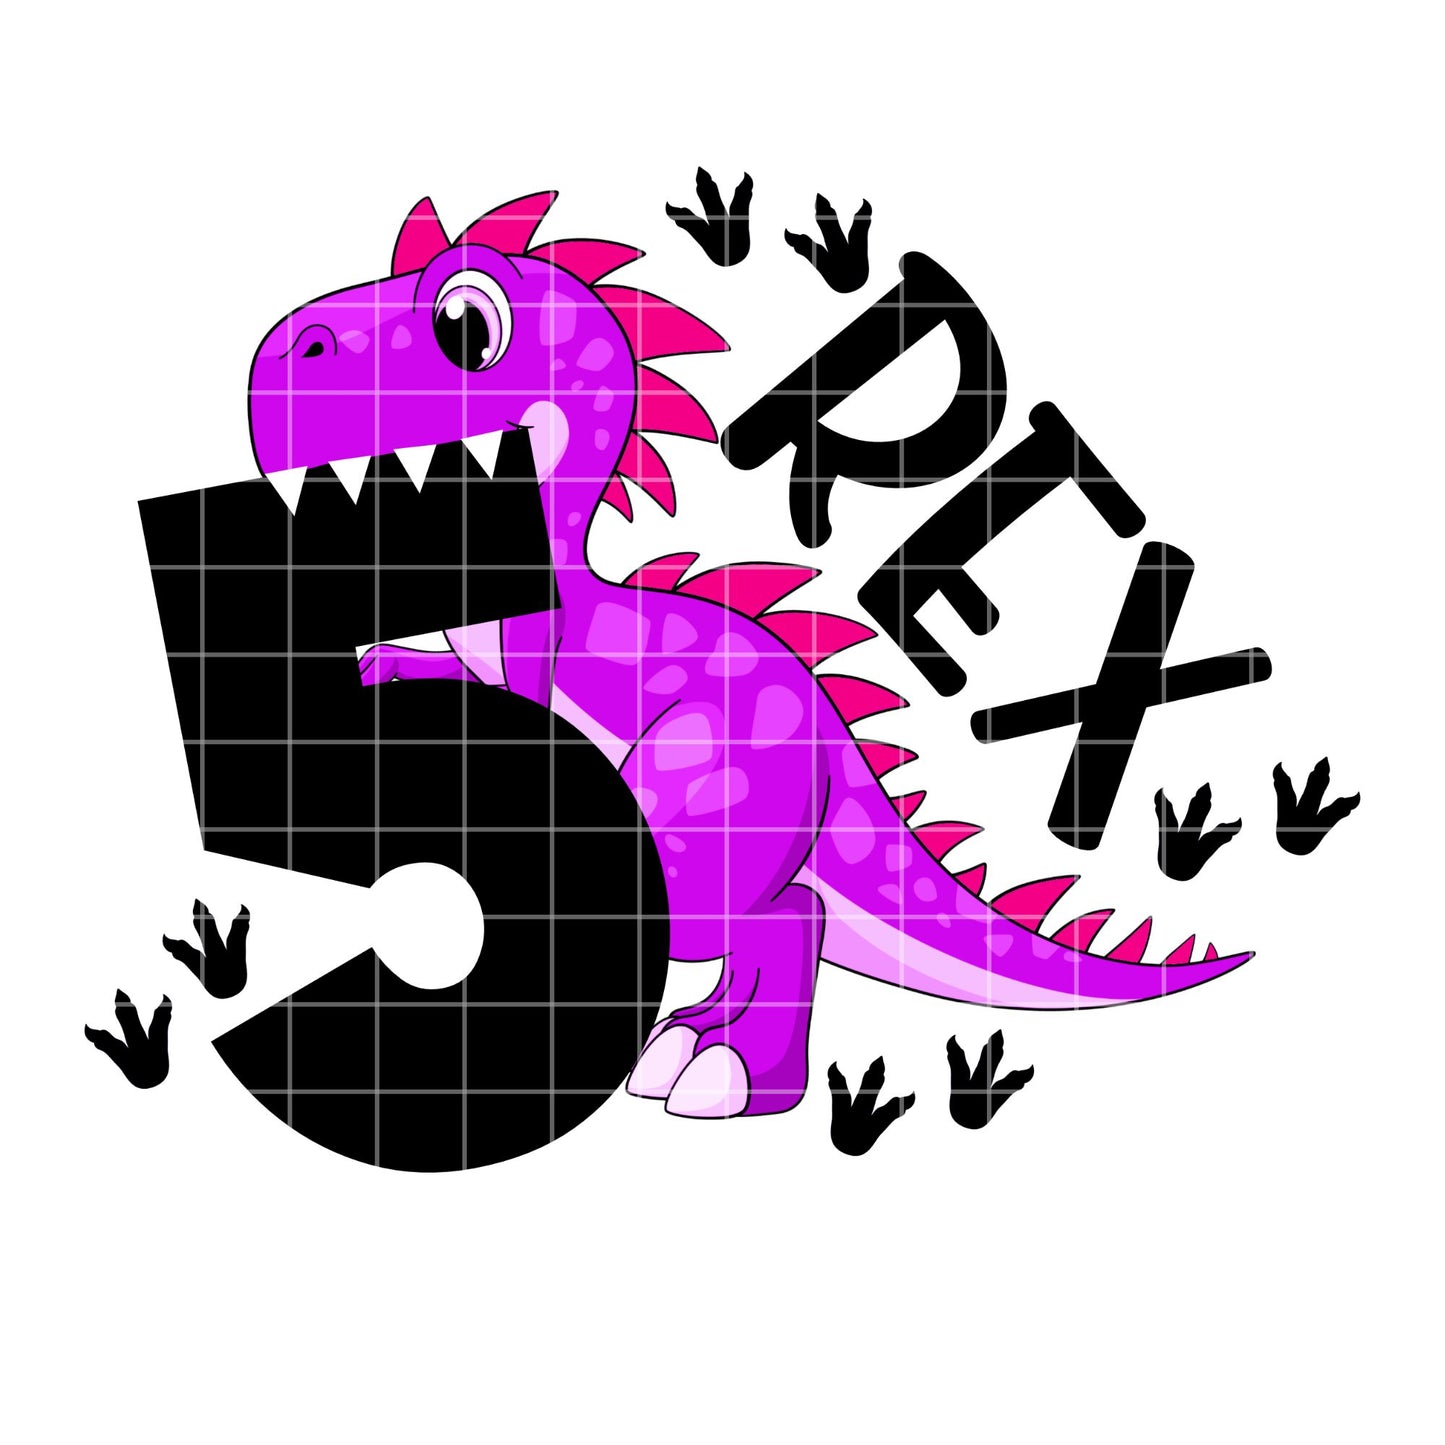 T-rex dinosaur 3rd.4th,and 5th birthday sublimation design png